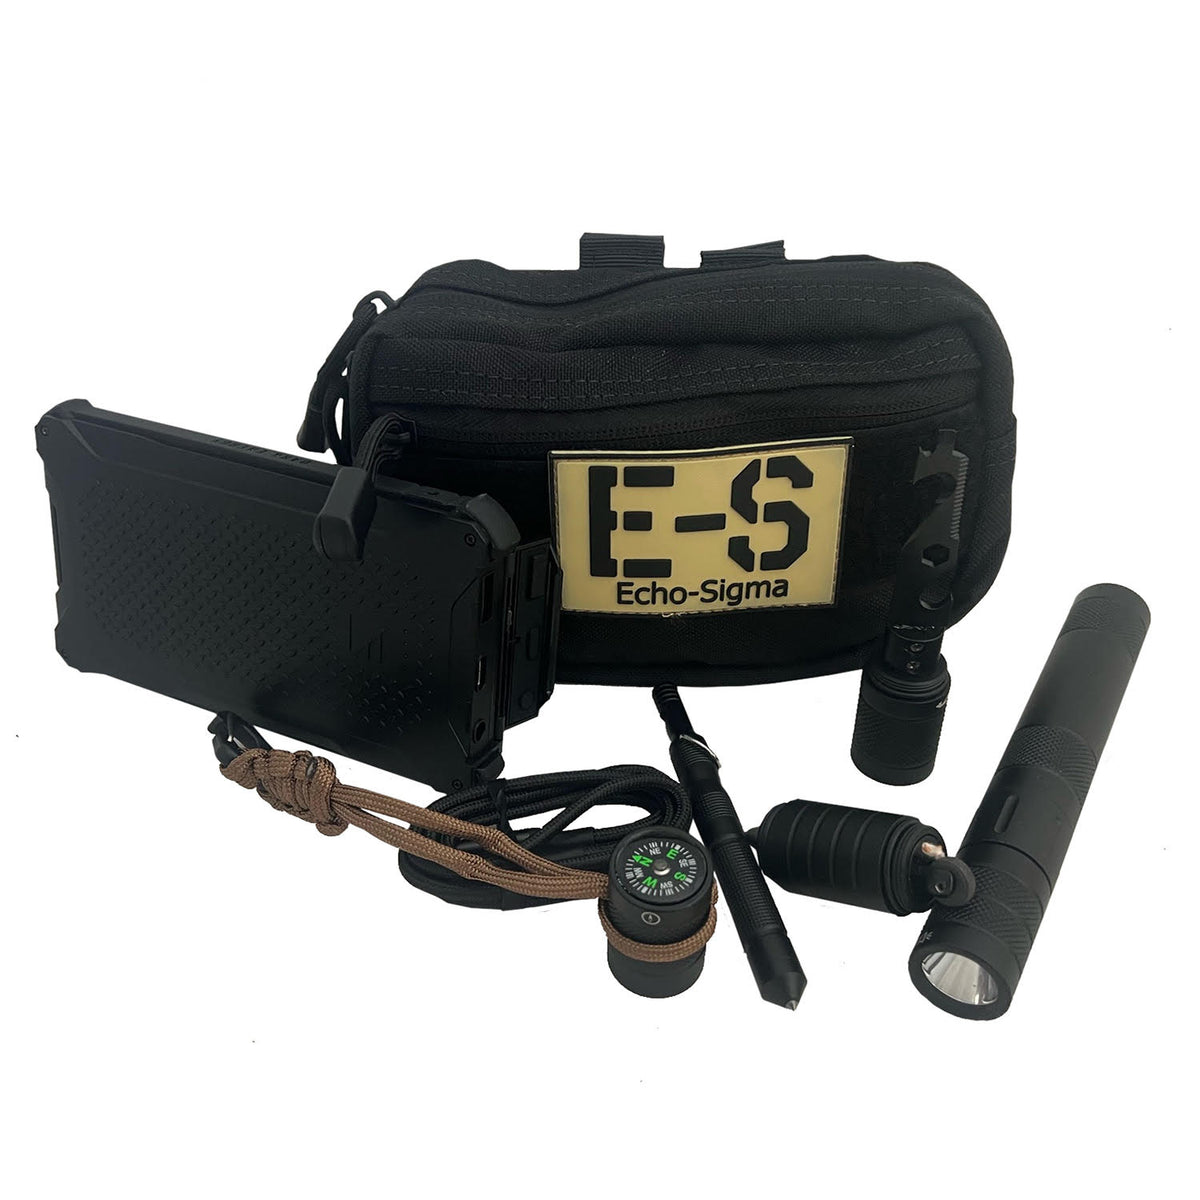 EDC-Every Day Carry-Small Emergency Kit